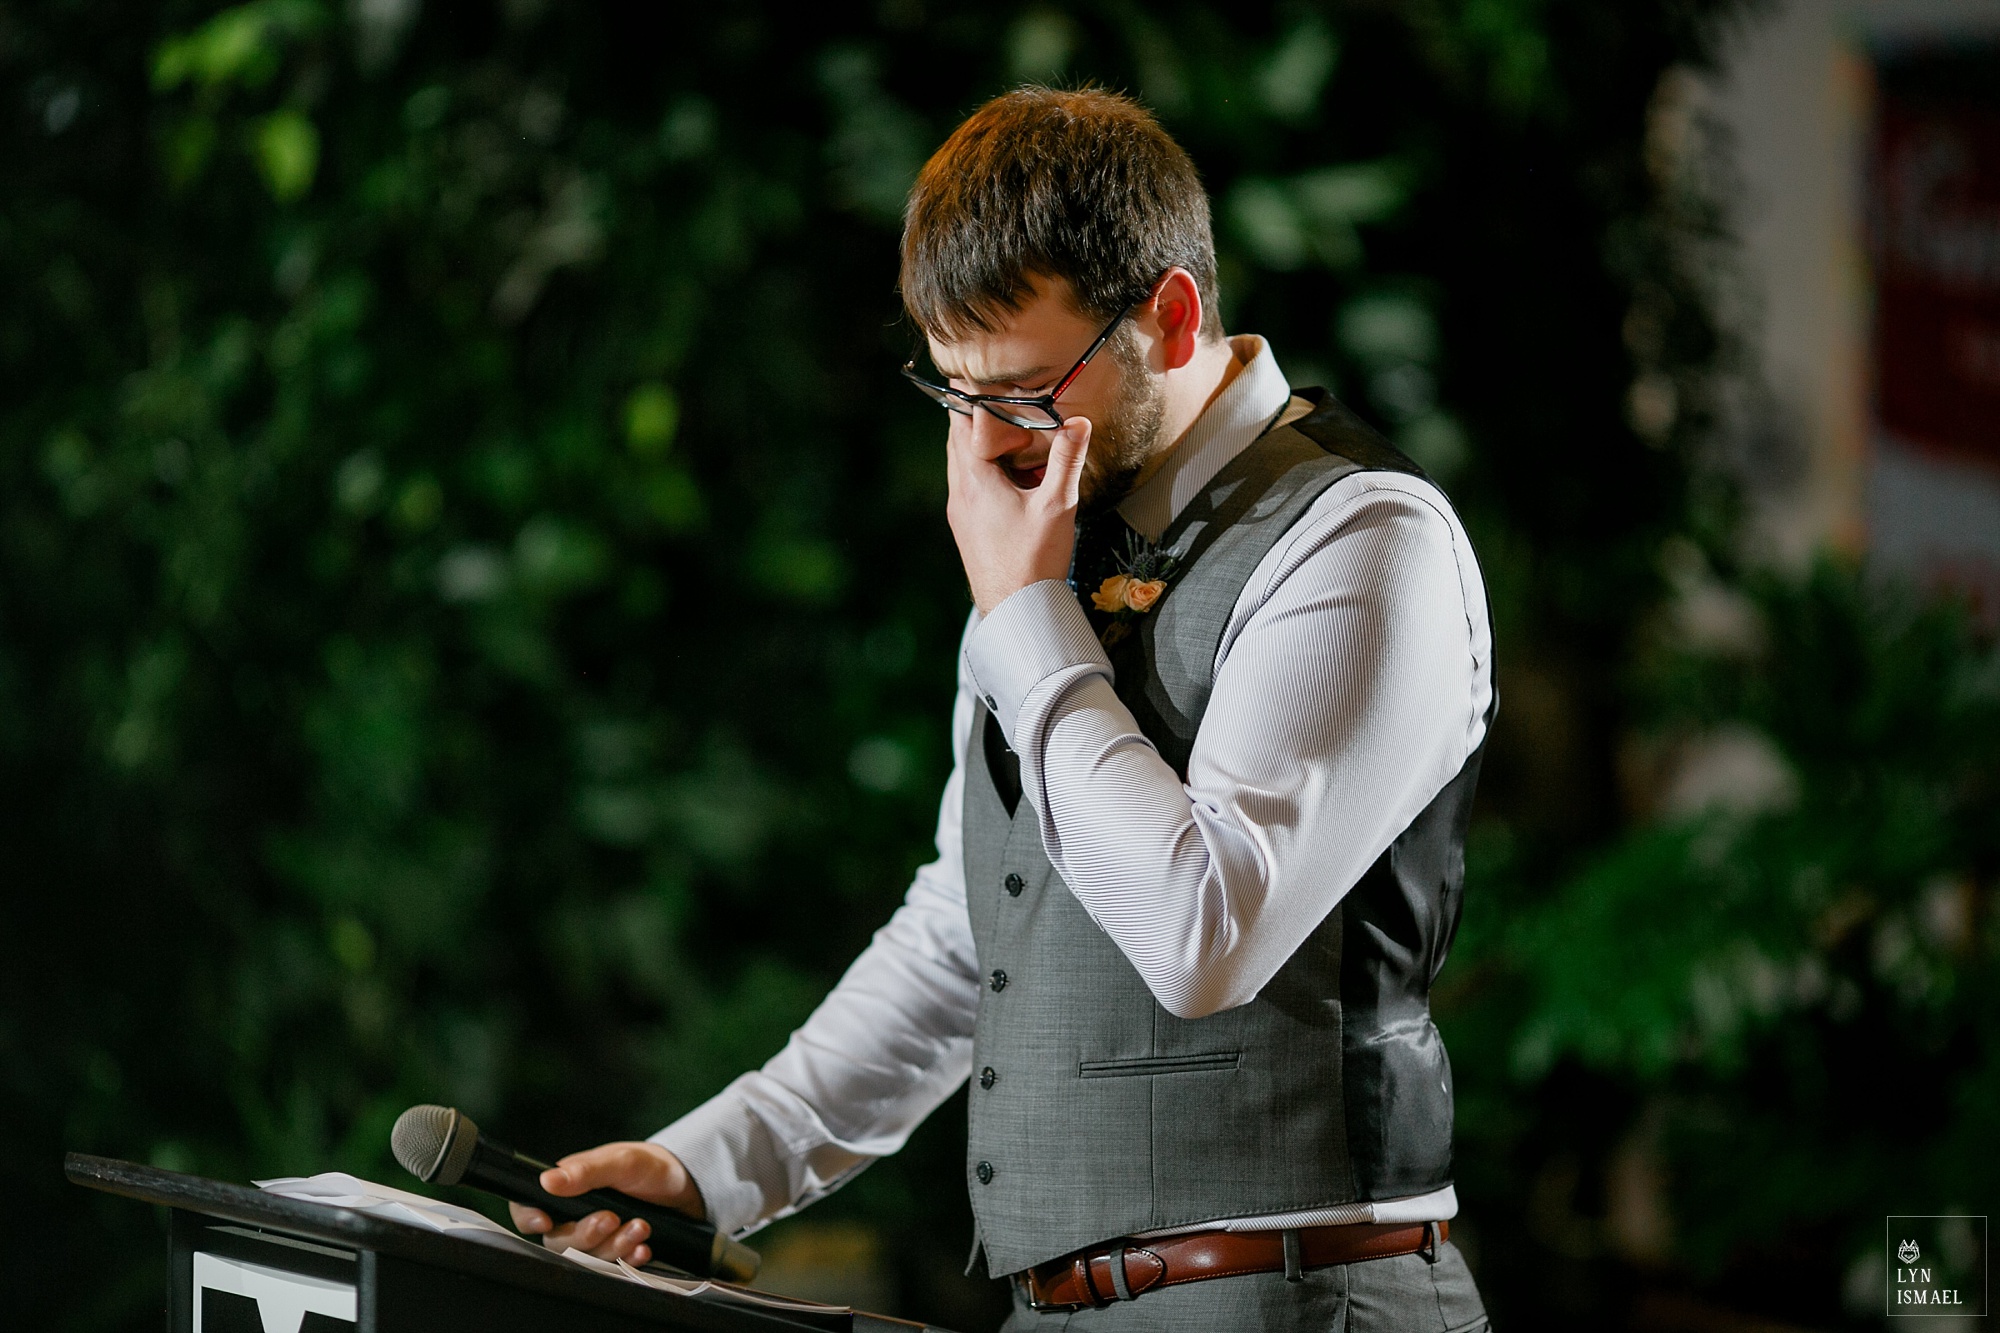 Best man becomes emotional deliver his speech